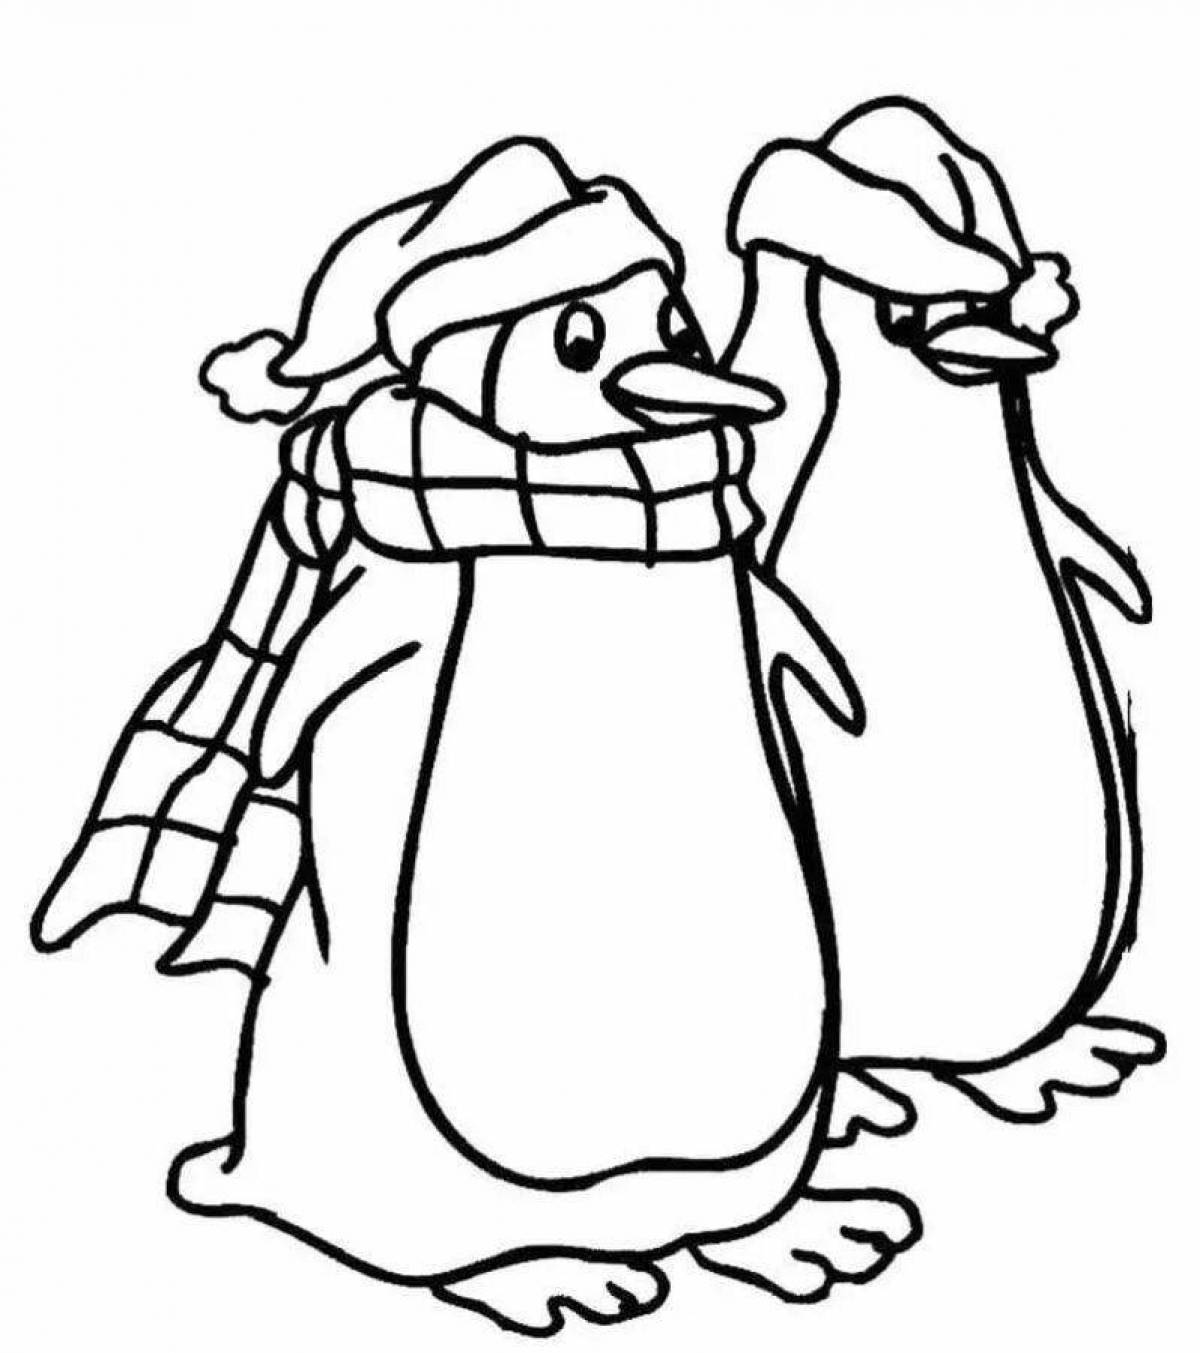 Adorable penguin drawing for kids